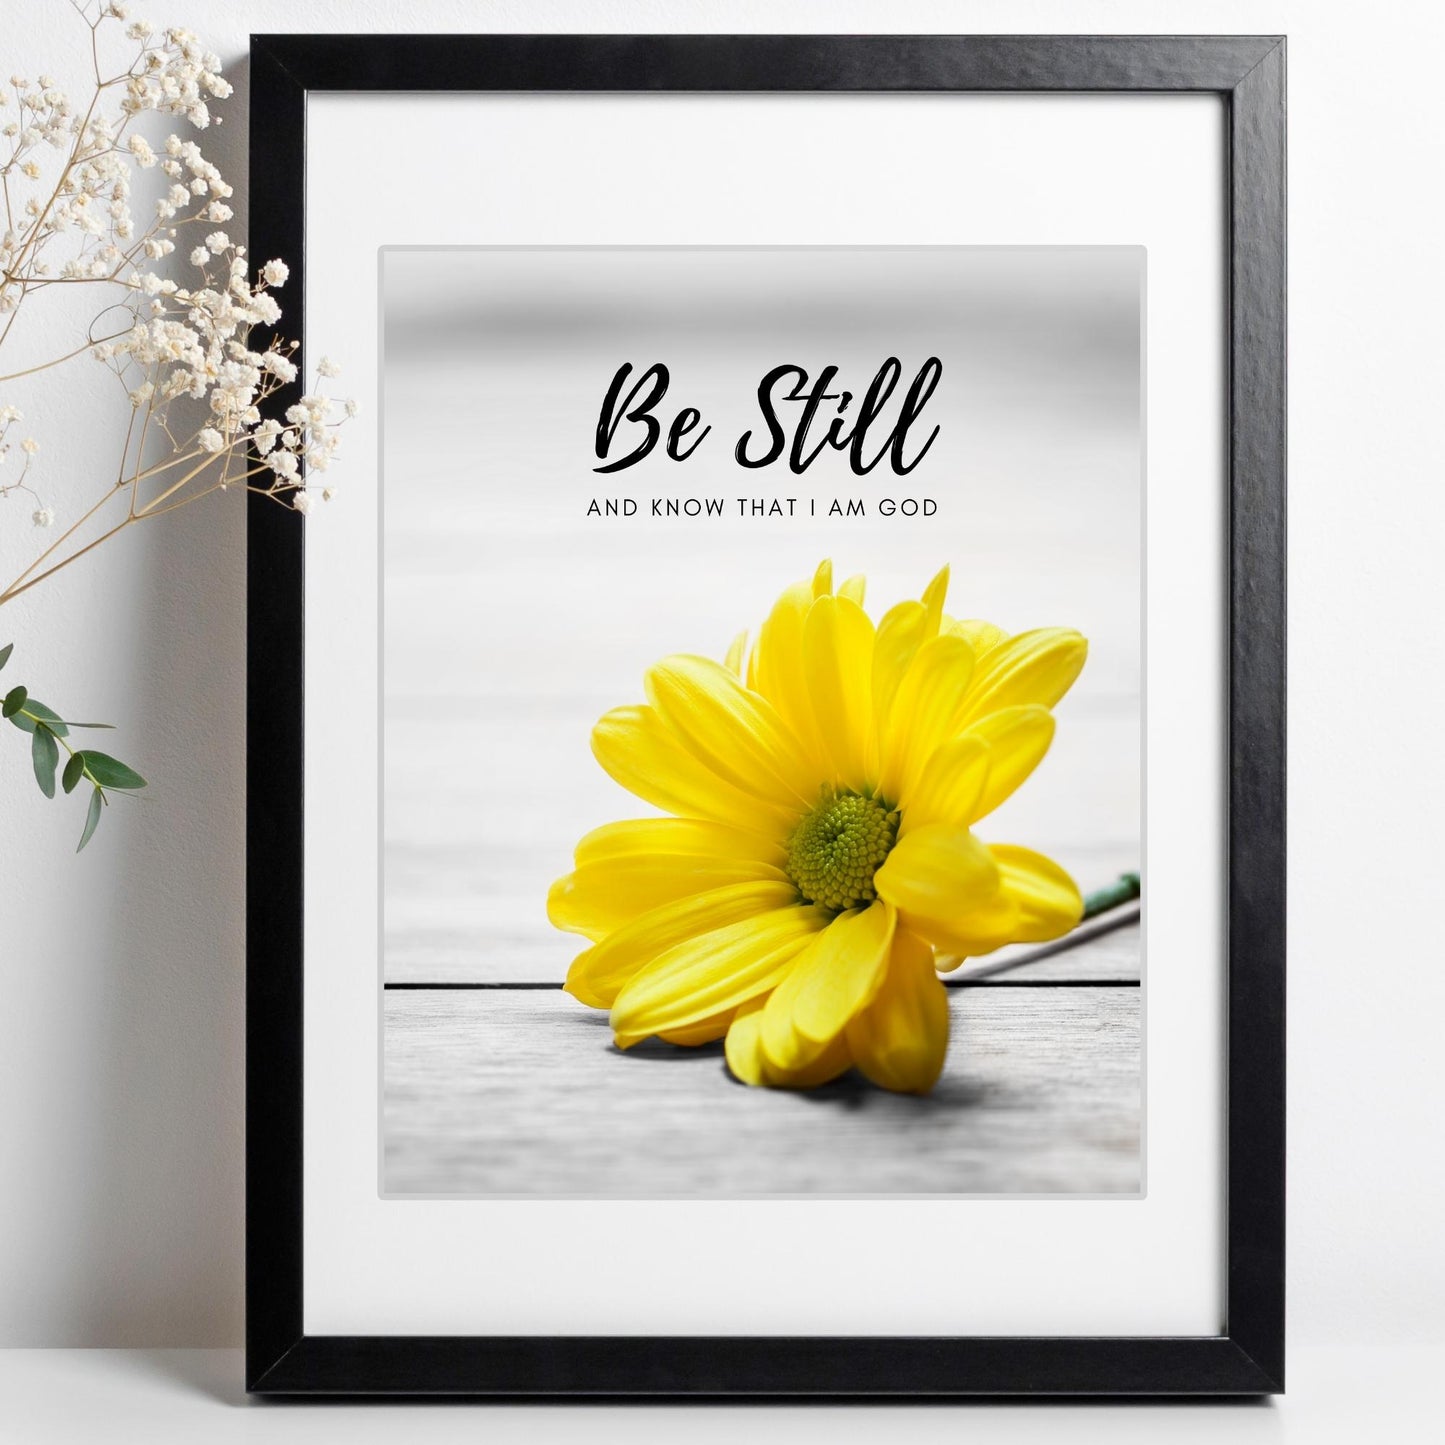 Inspirational Word Art - Be Still and know that I am God - Yellow Daisy Wall Decor (8x10 print) | bible verse Psalm 46:10 wall decor in black frame on white wall next to babys breath | oak7west.com